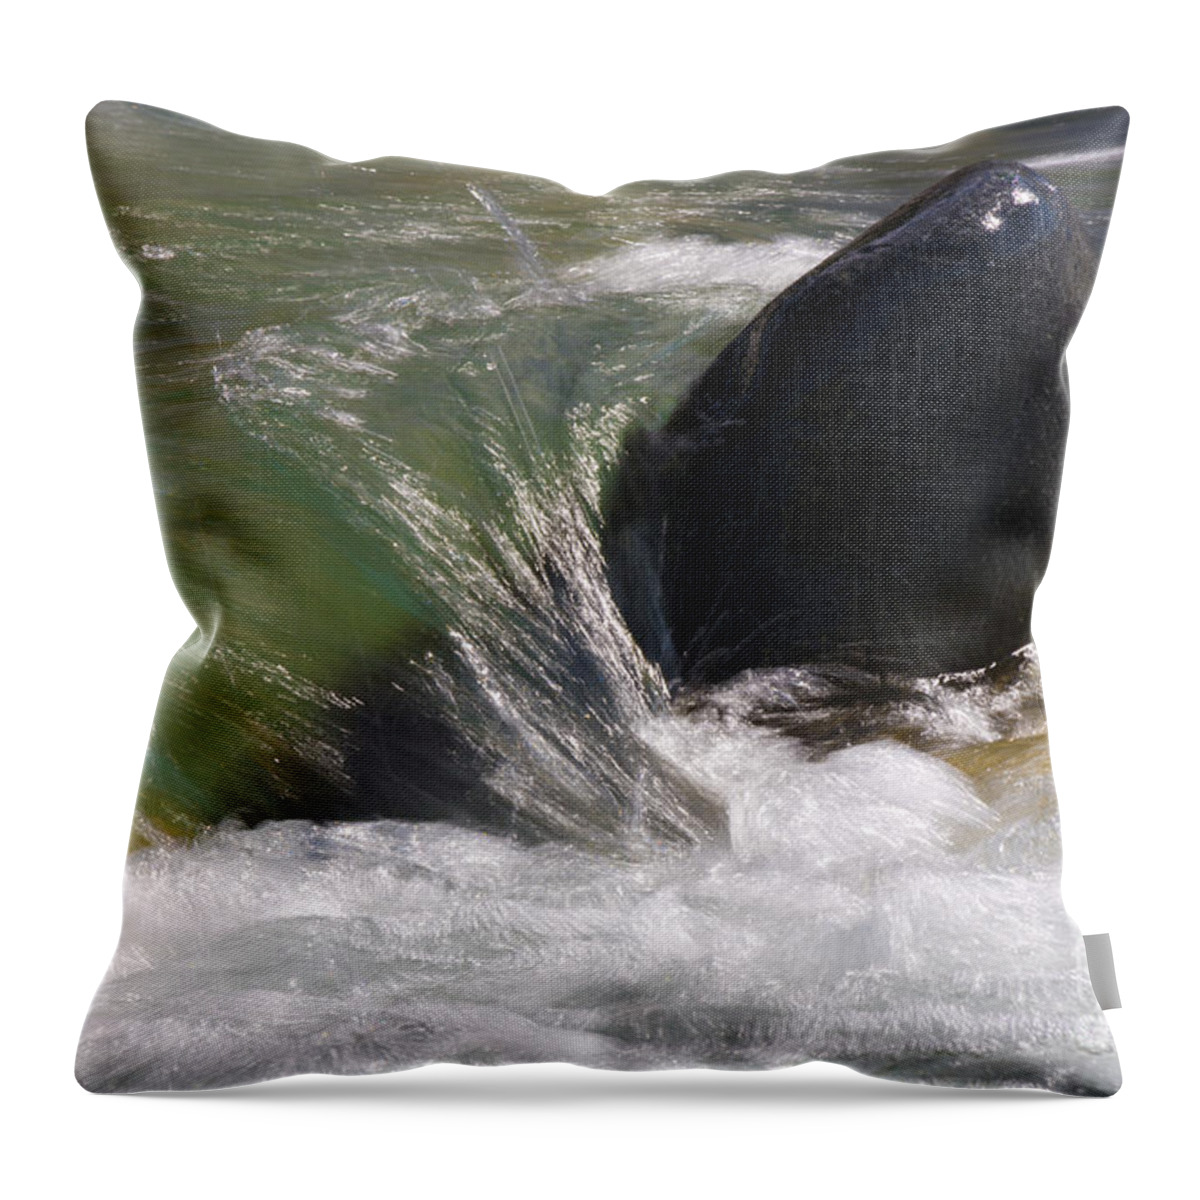 Heiko Throw Pillow featuring the photograph Rock The River by Heiko Koehrer-Wagner